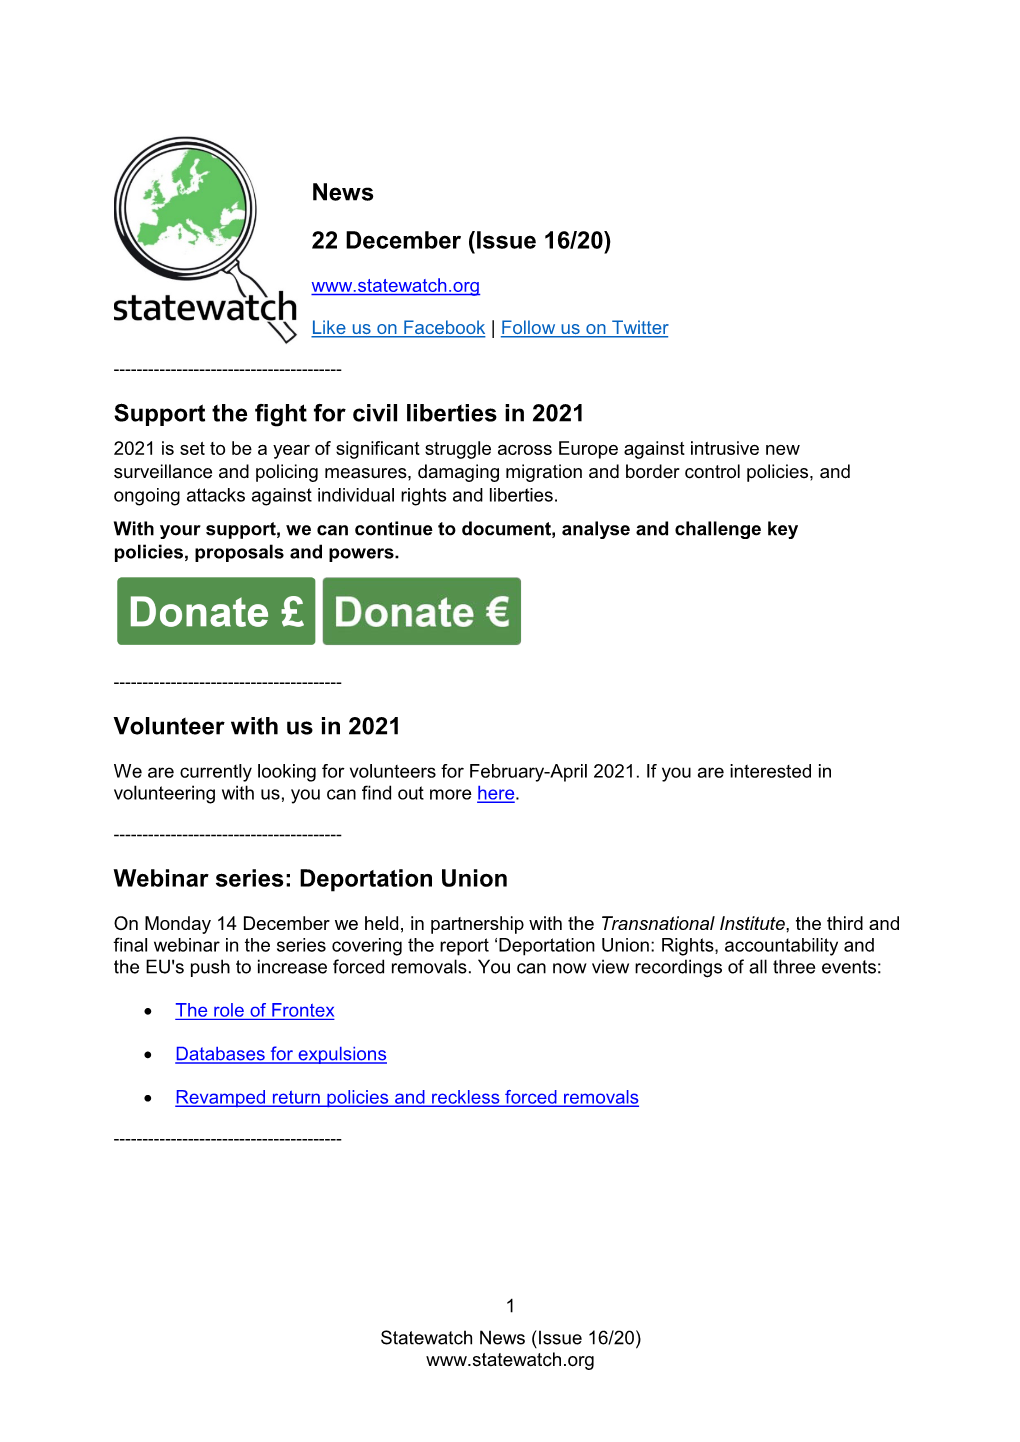 News 22 December (Issue 16/20) Support the Fight For